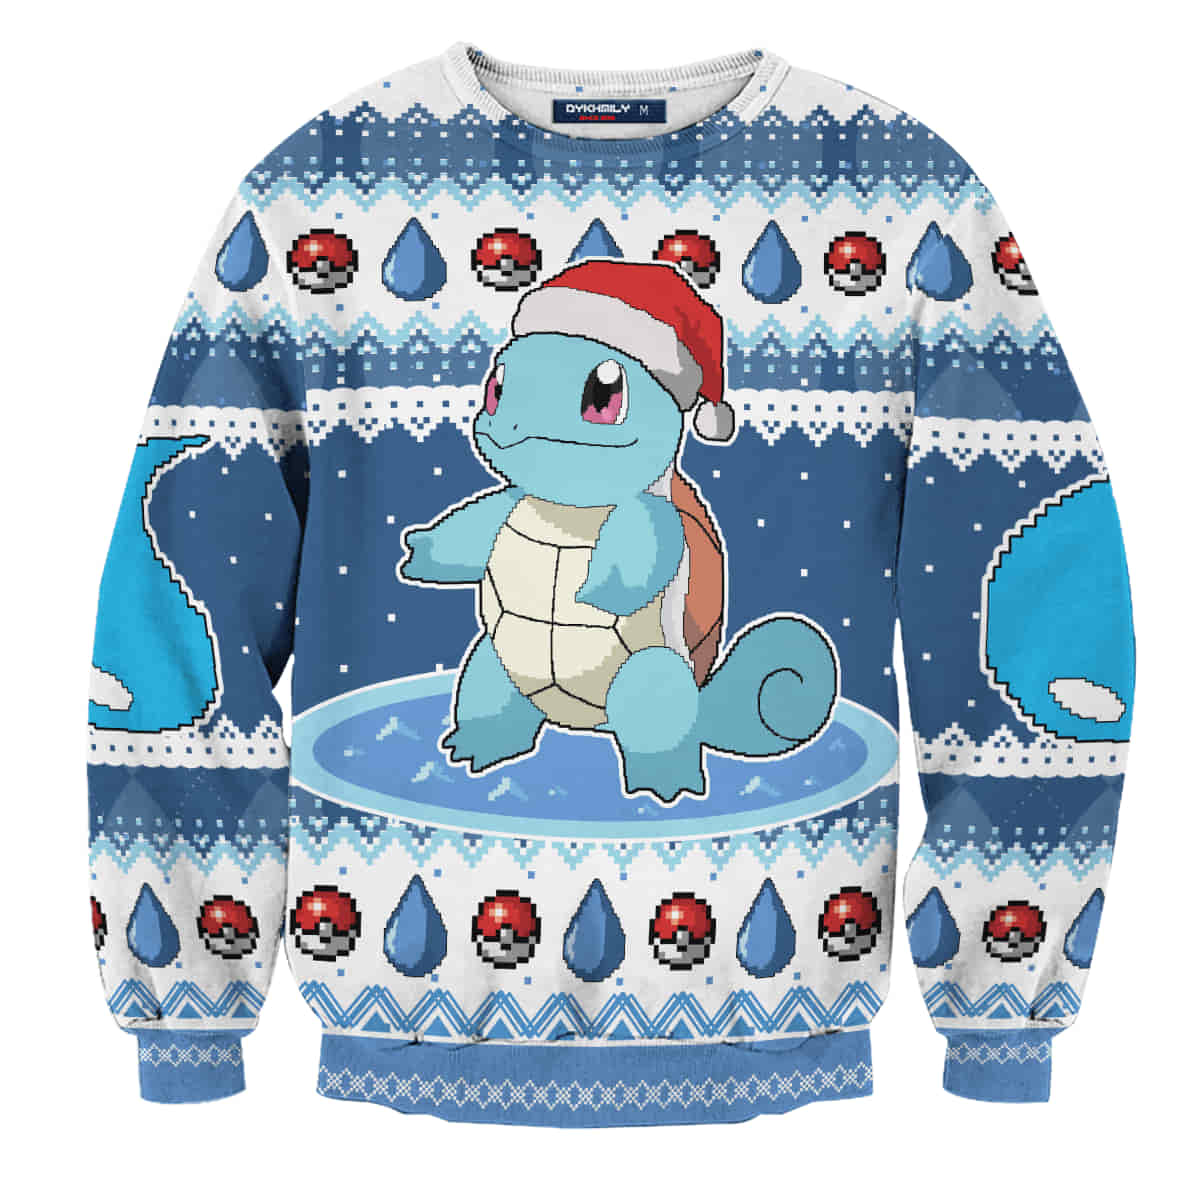 Squirtle Pokemon Wool Knitted Sweater, Christmas 3D Sweater